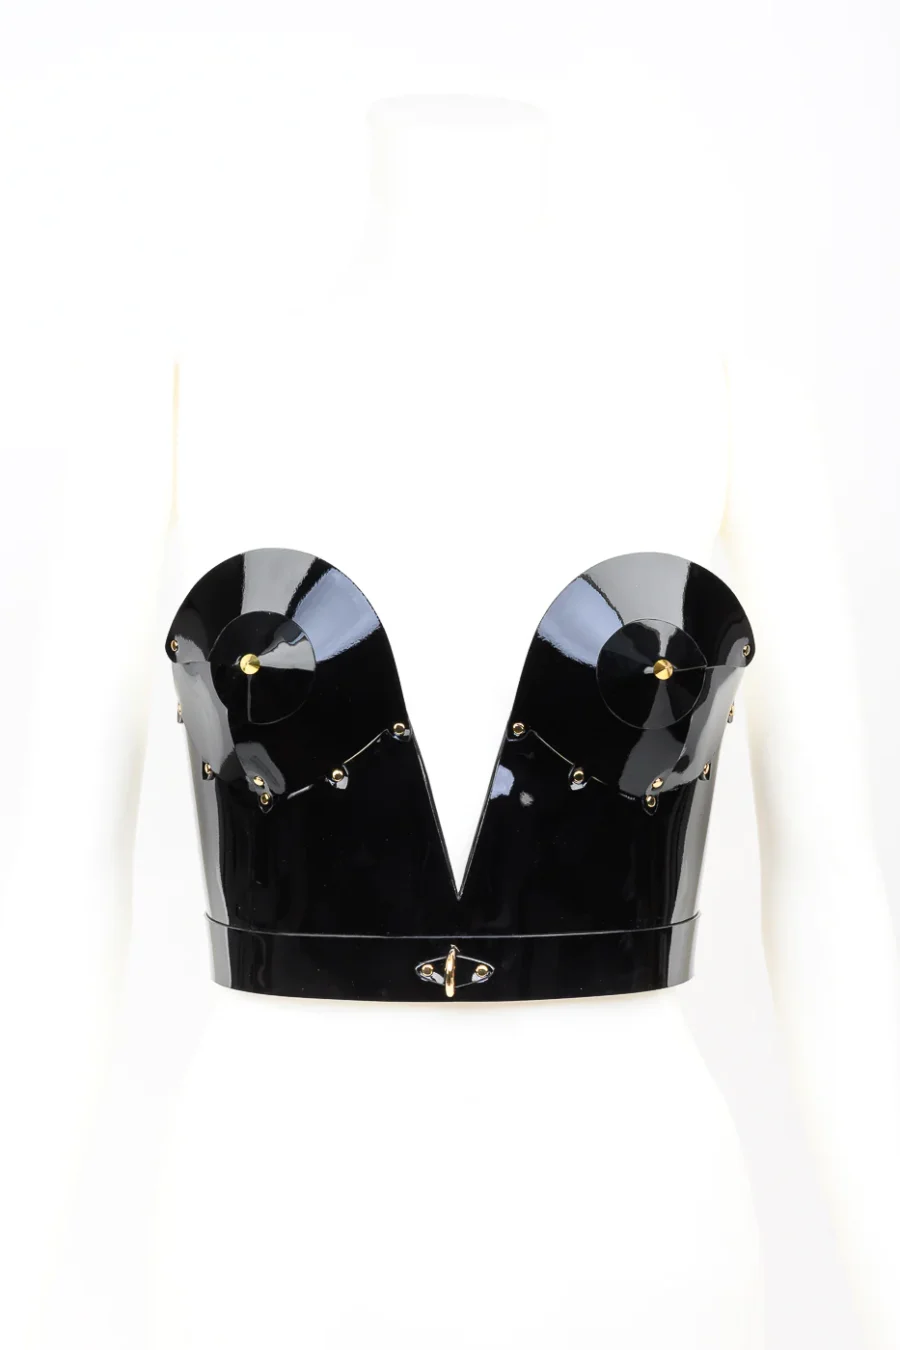 Fraulein Kink Rica Cast Corset With Spikes 5